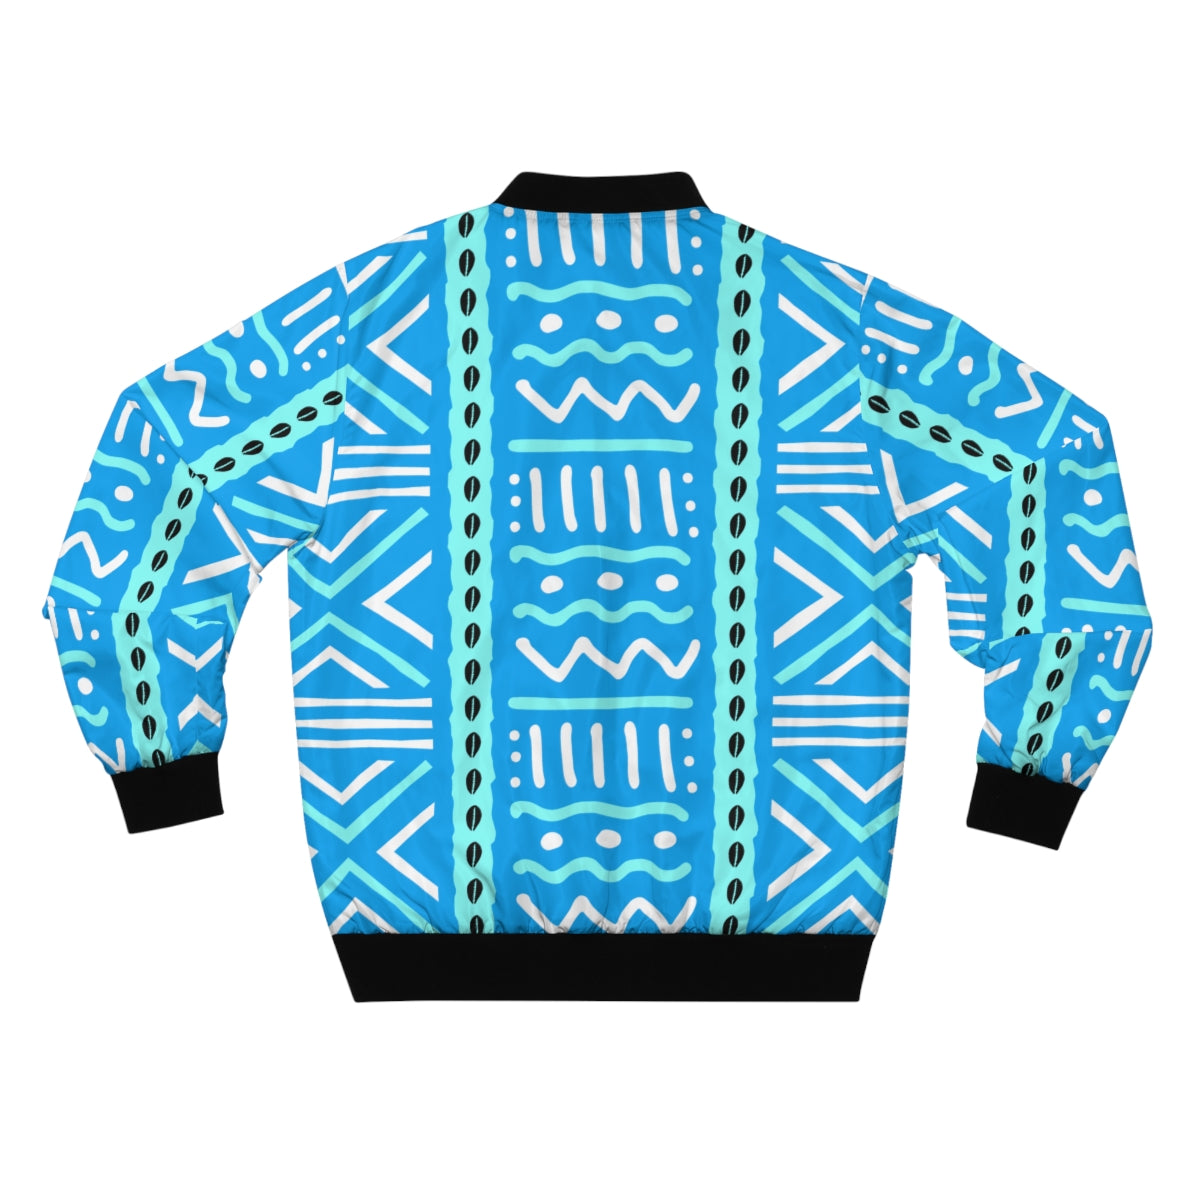 Mudcloth Blue and White Print Bomber Jacket